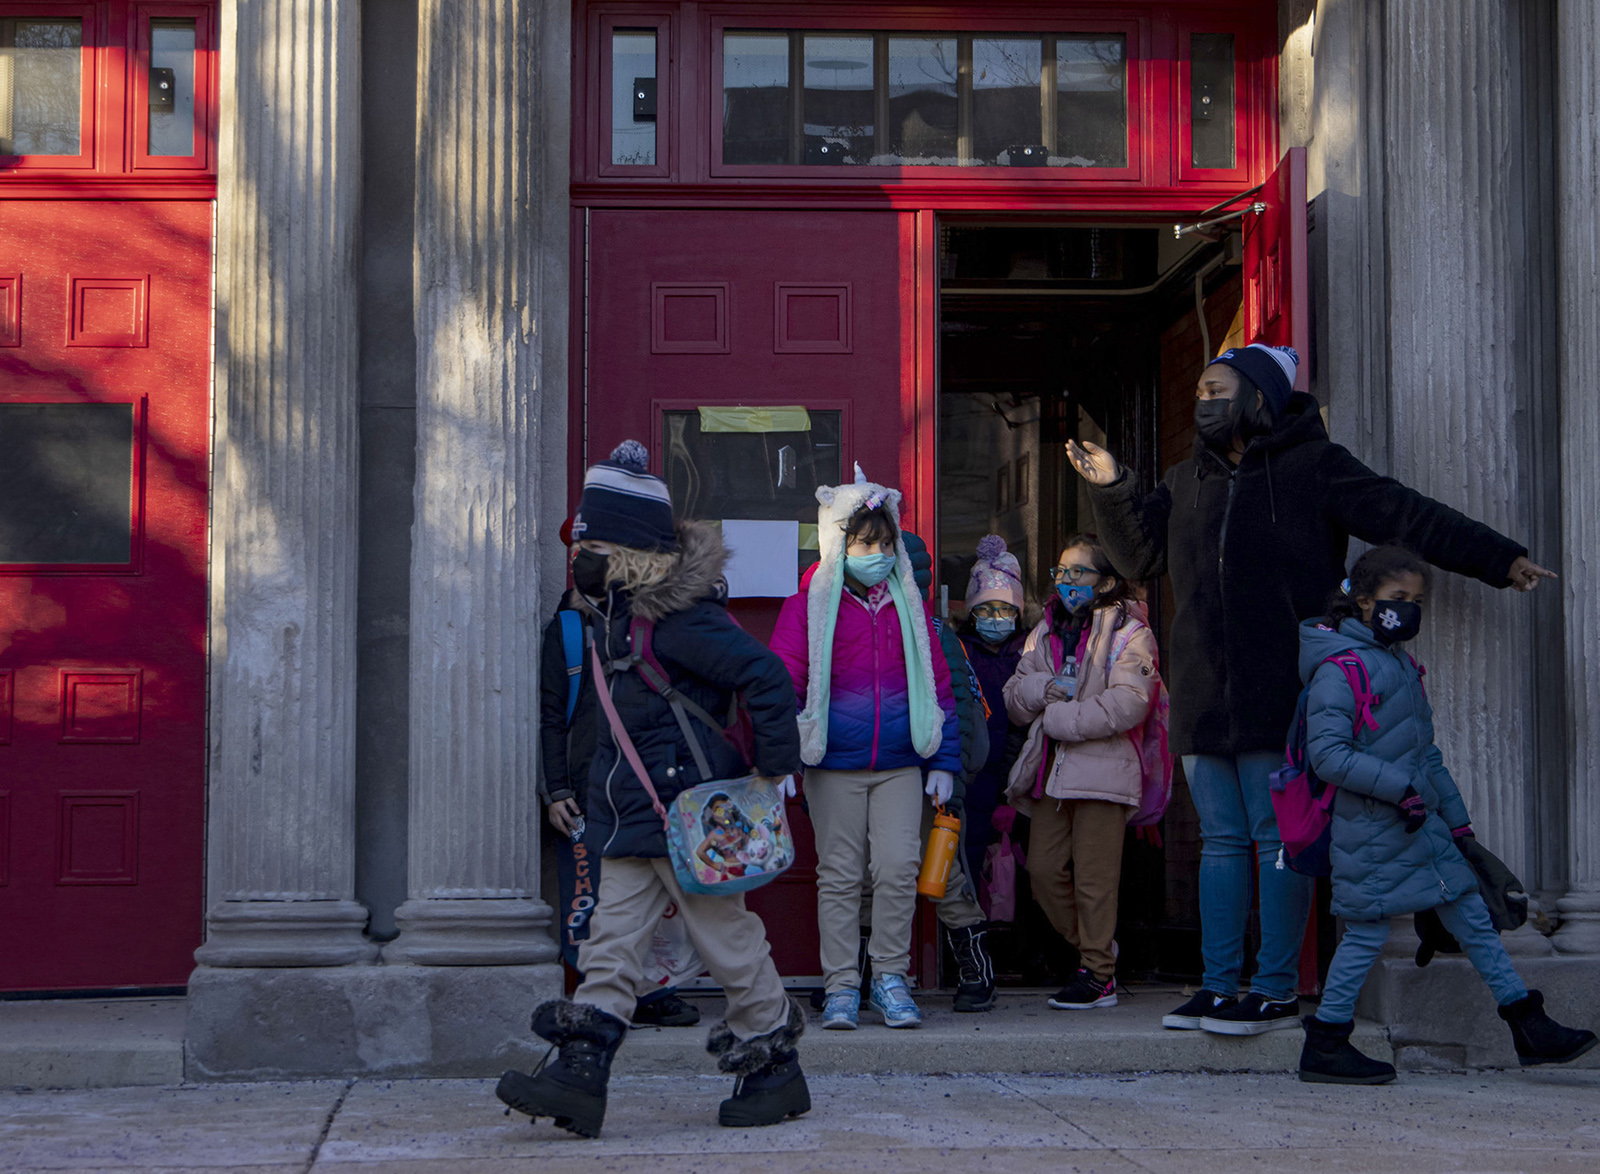 Students at the end of their school day at Darwin Elementary in Chicago in early January.  